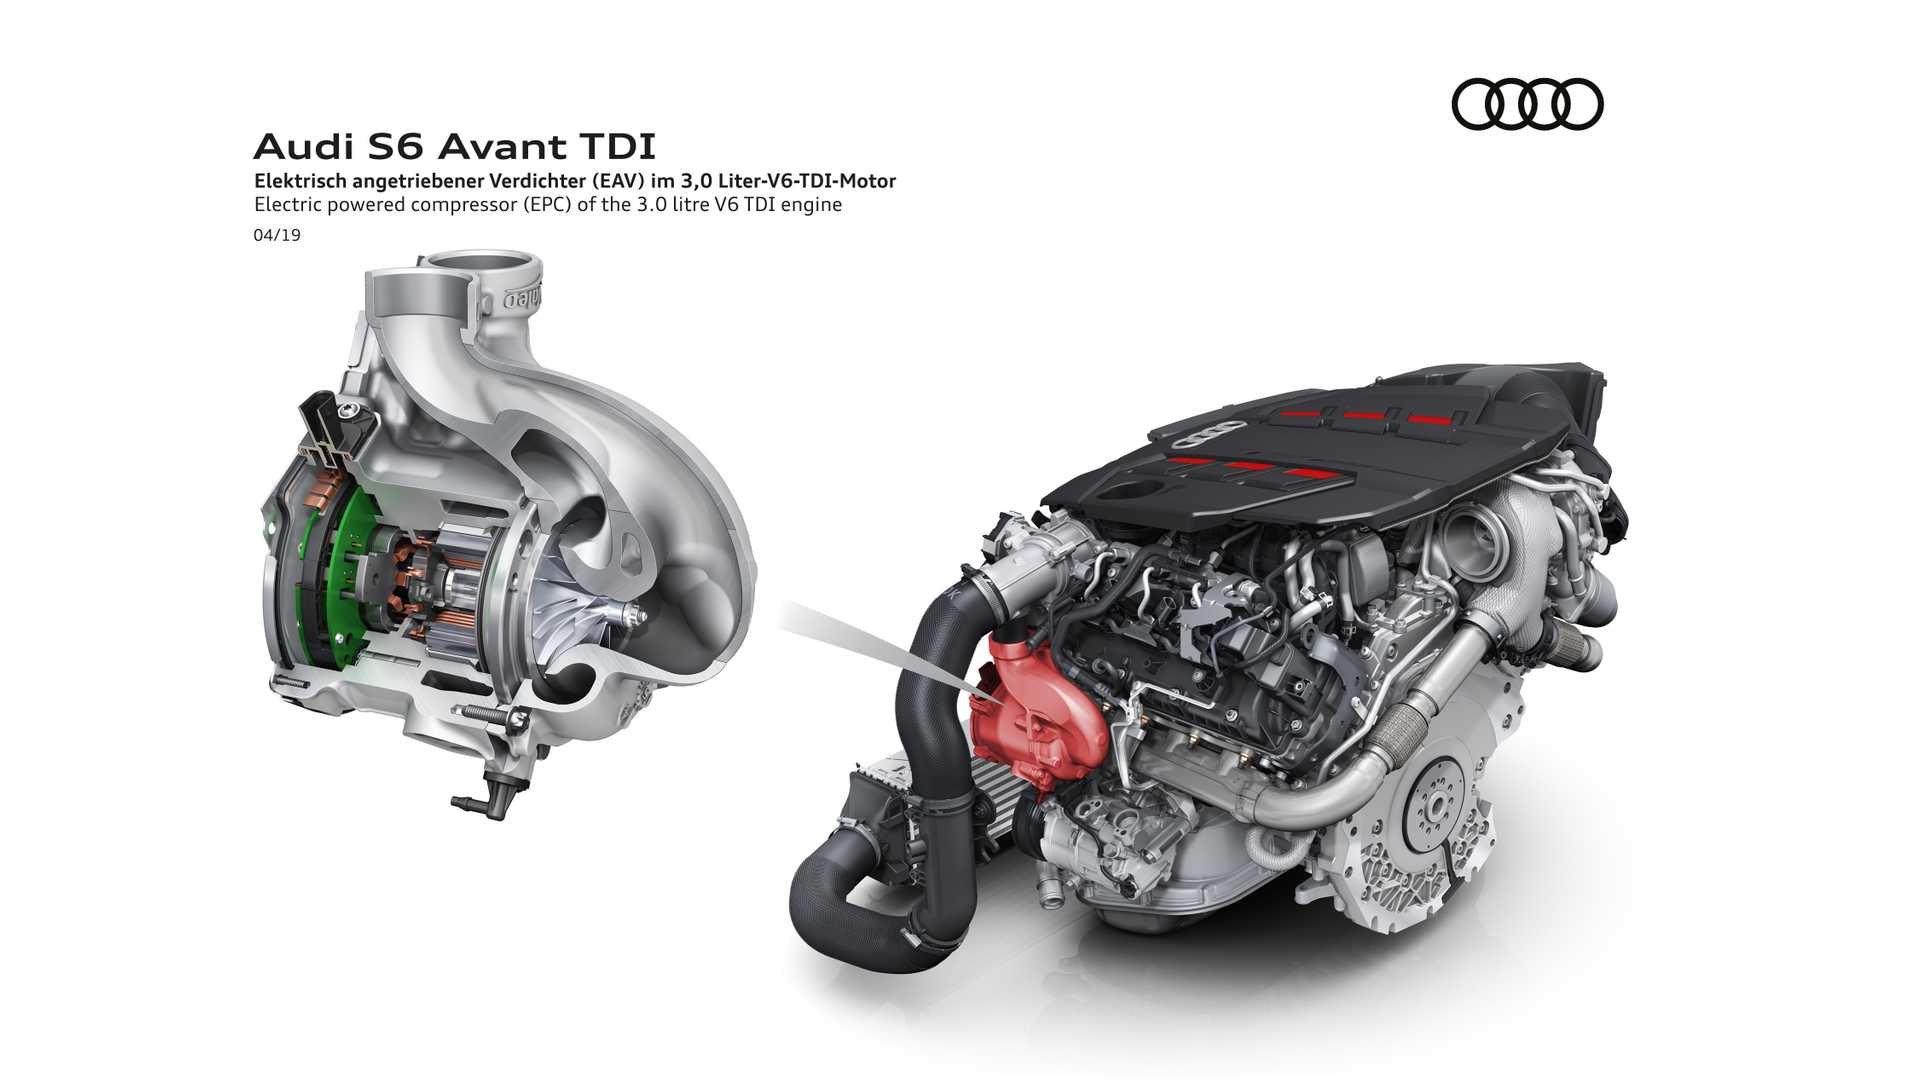 2019 Audi S6 Avant TDI Electric powered compressor (EPC) Wallpapers #23 of 26